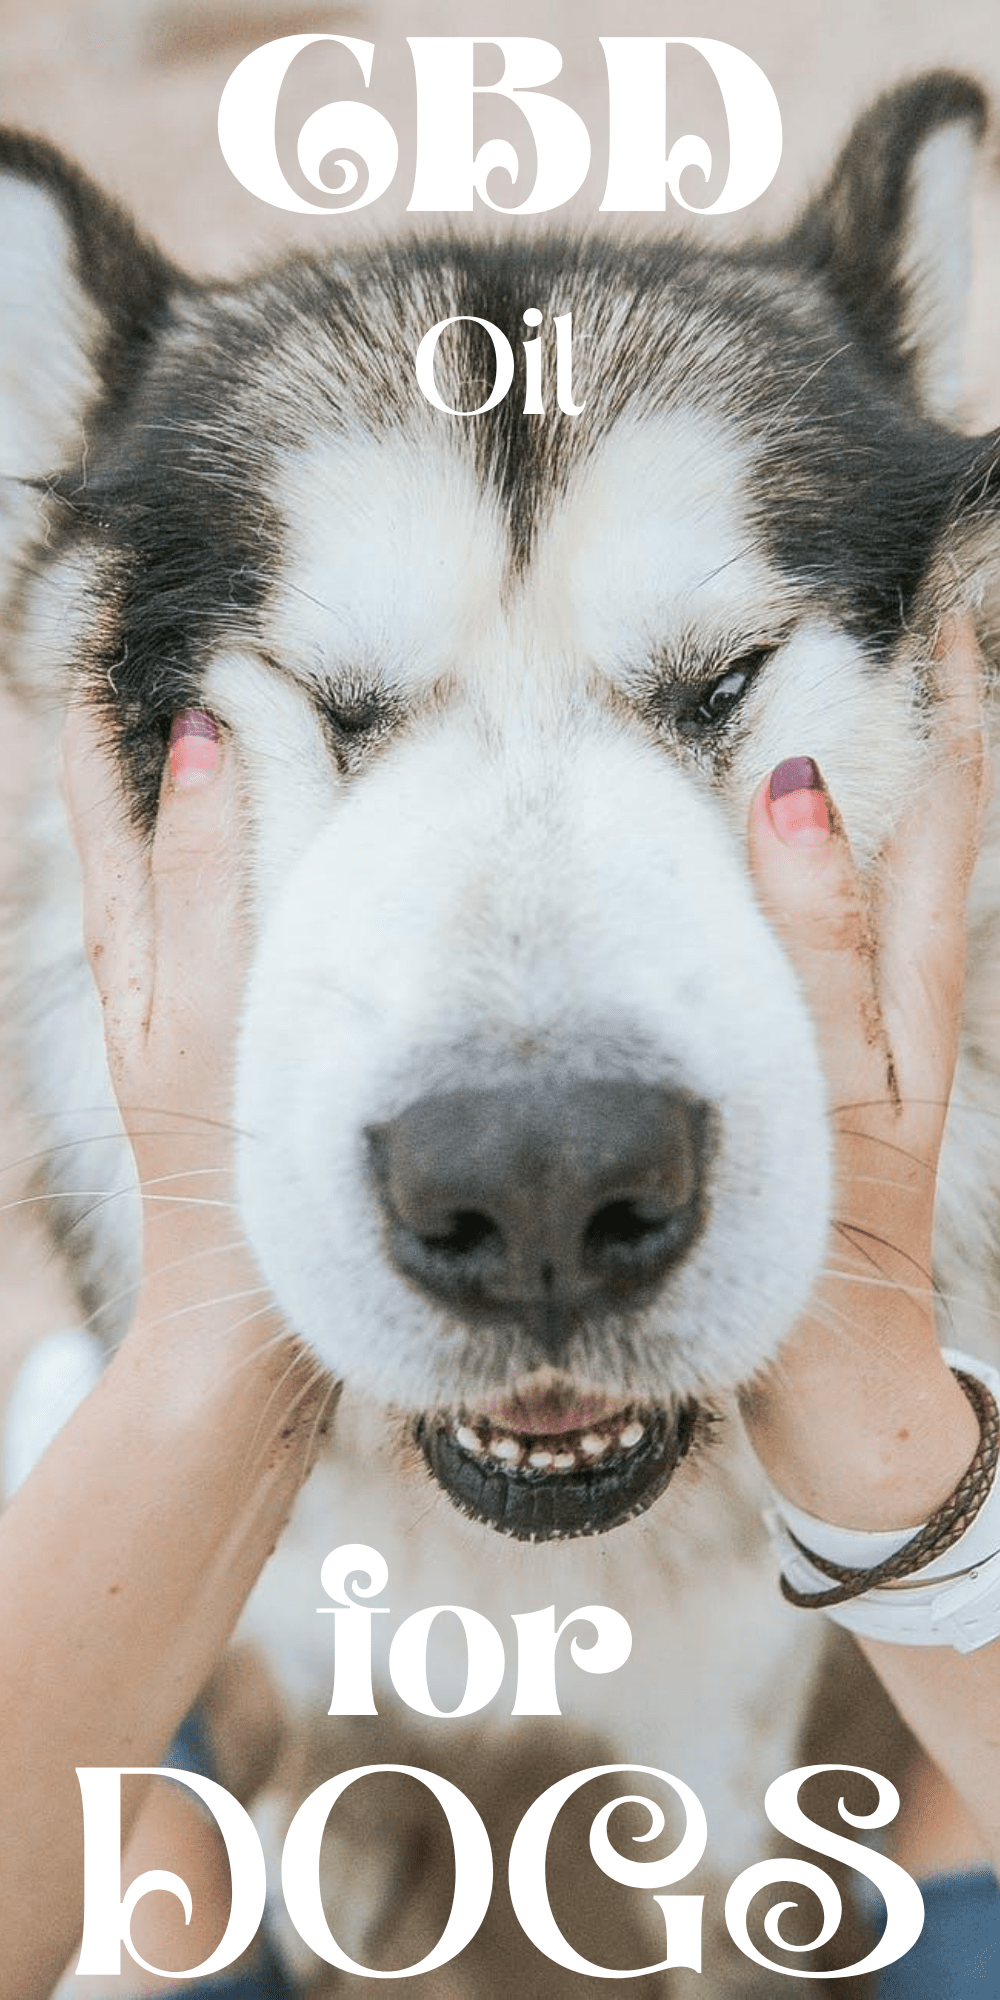 4 Medical Conditions CBD Oil For Dogs Can Help Treat